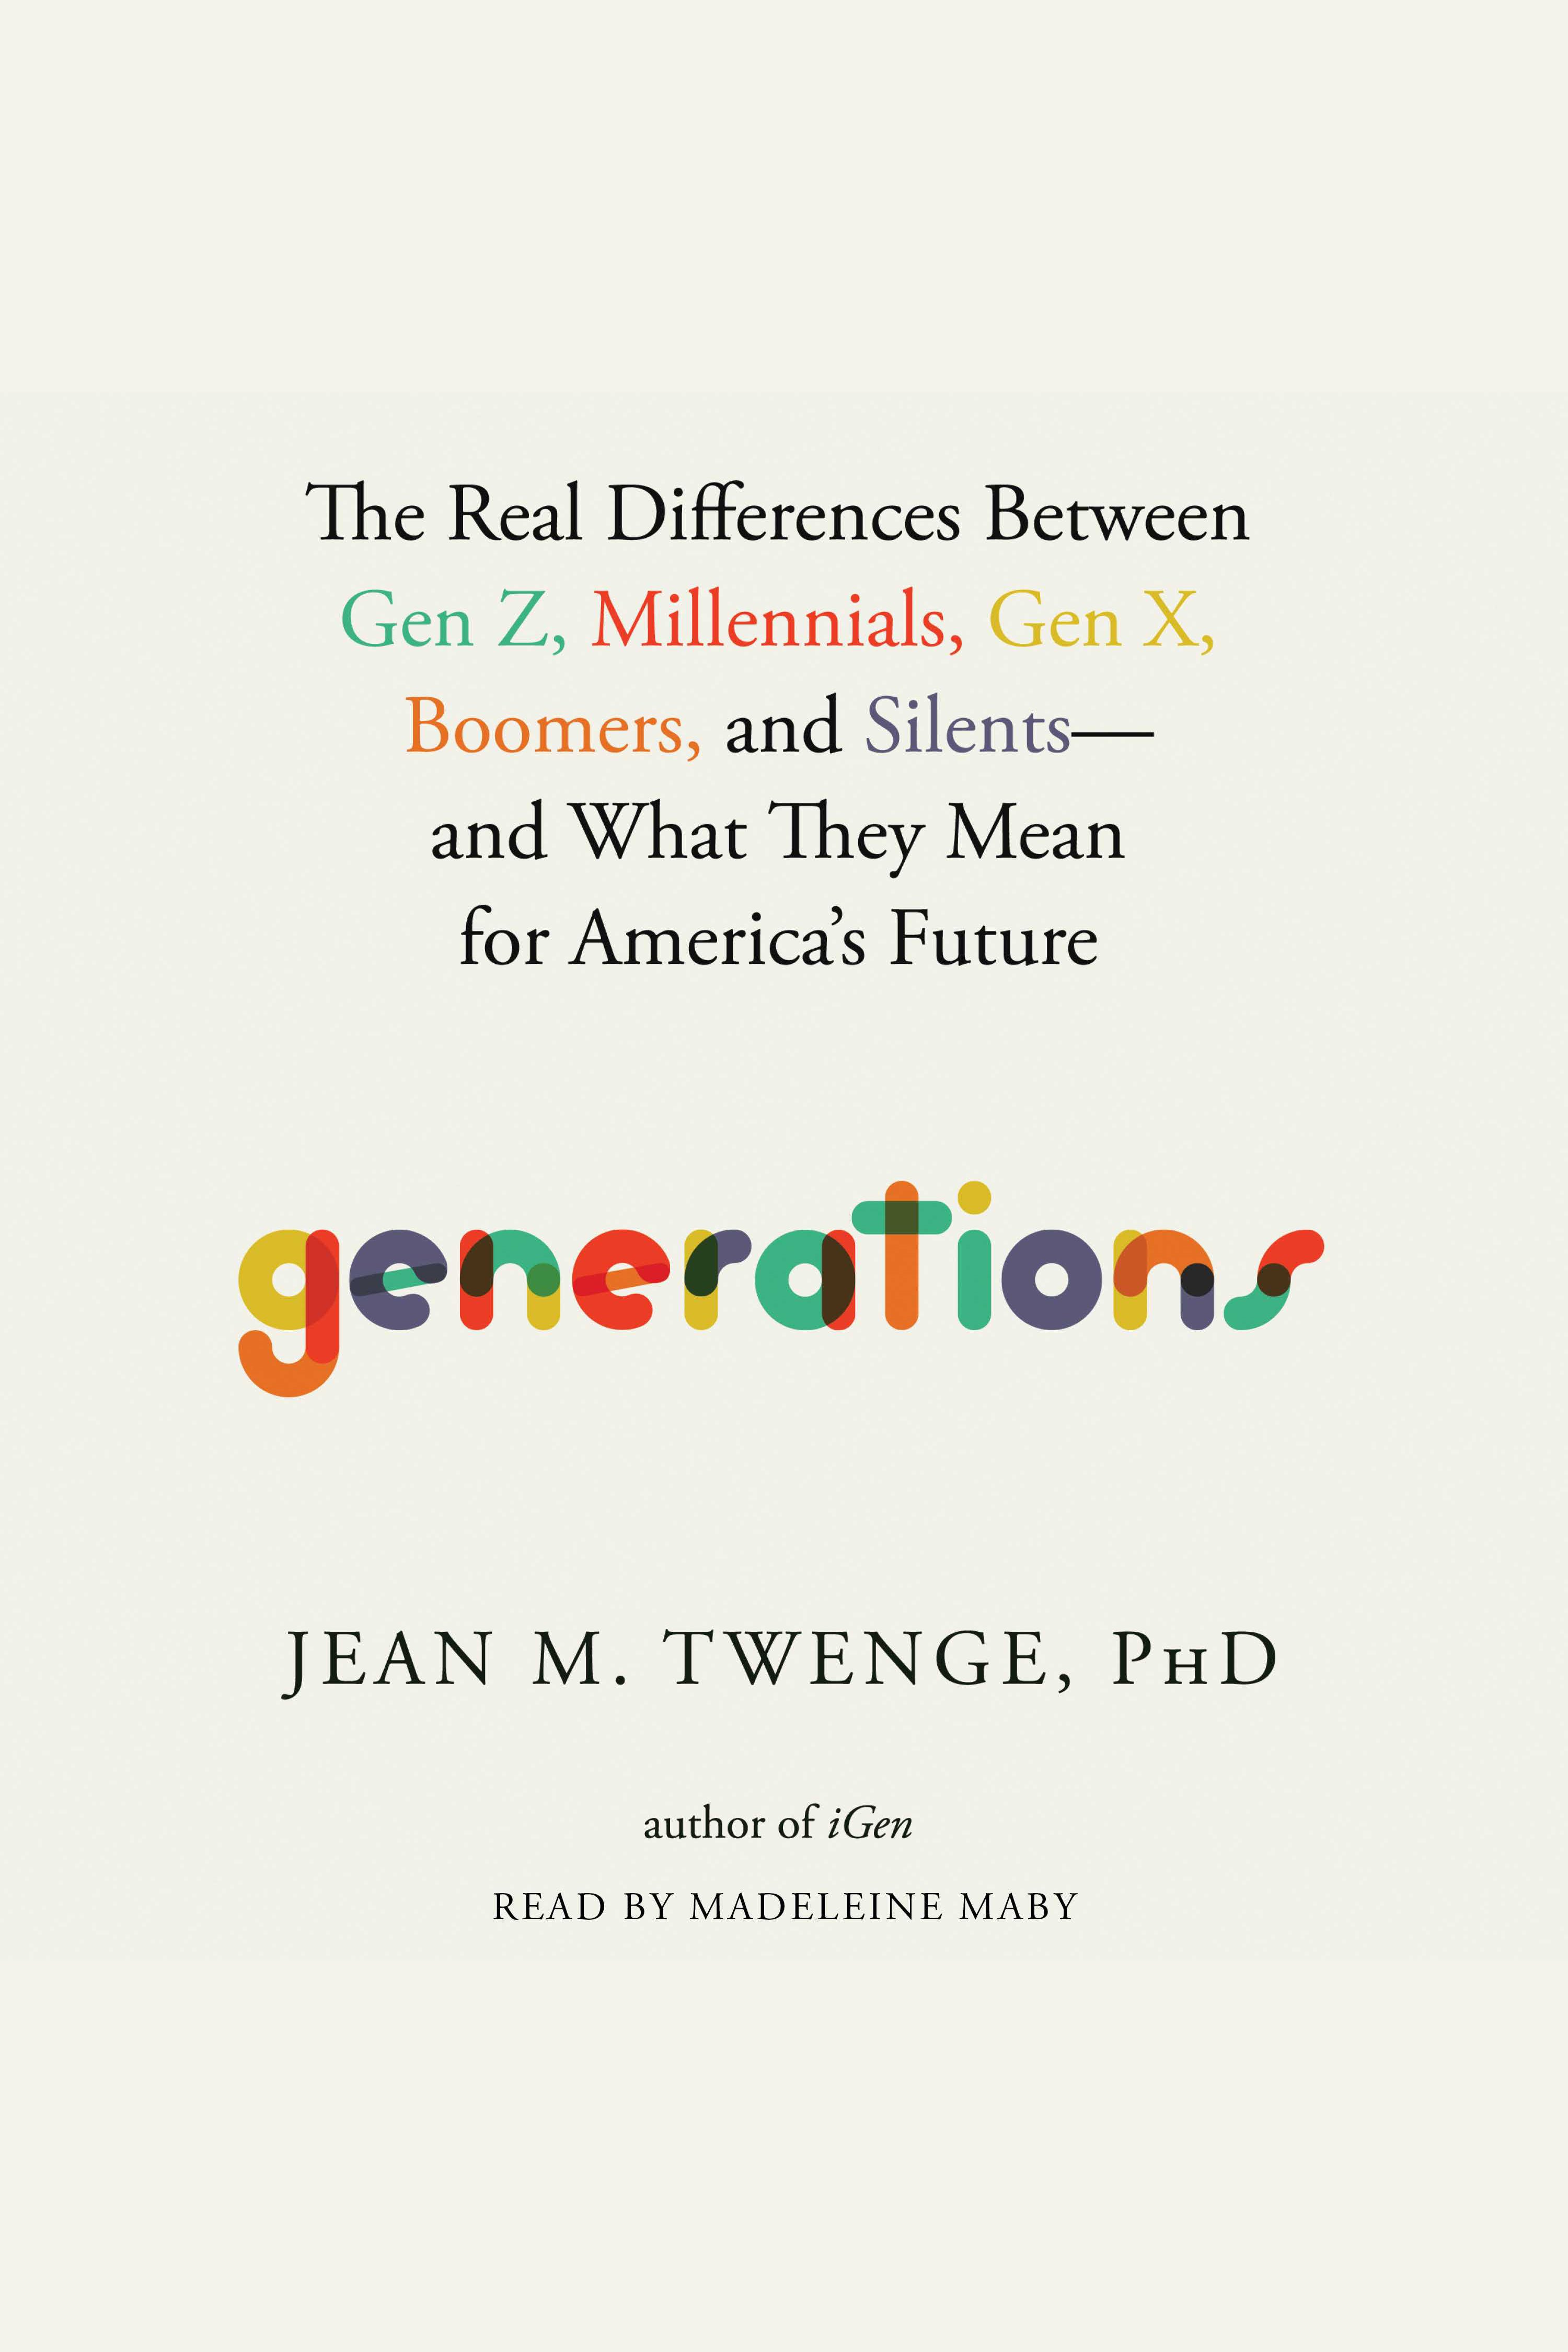 Generations The Real Differences between Gen Z, Millennials, Gen X, Boomers, and Silents—and What They Mean for America's Future cover image